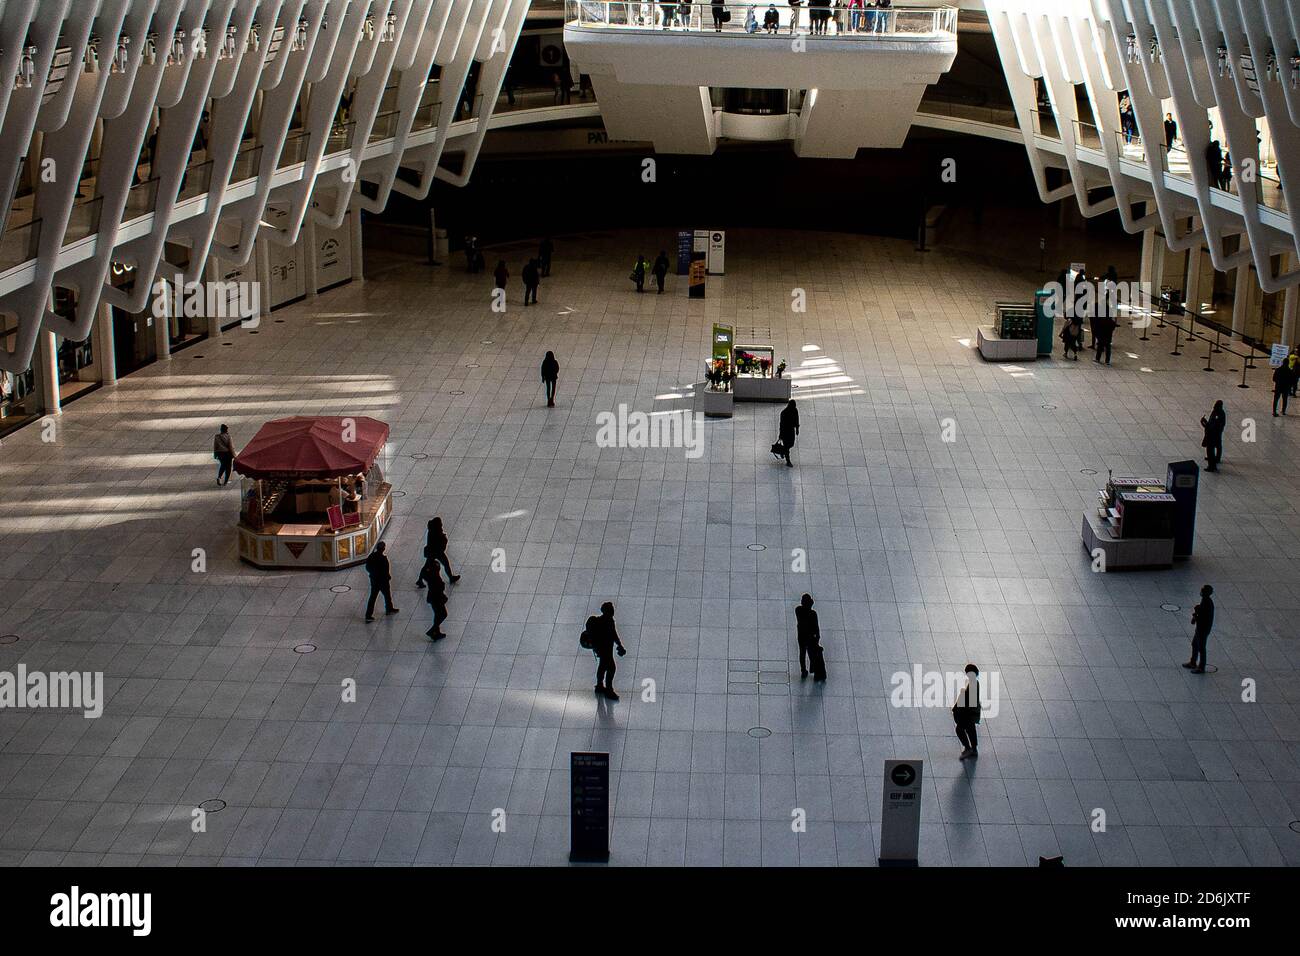 A Quiet Rush Hour During Covid 19 at The Occulus in Manhatten NY Stock Photo